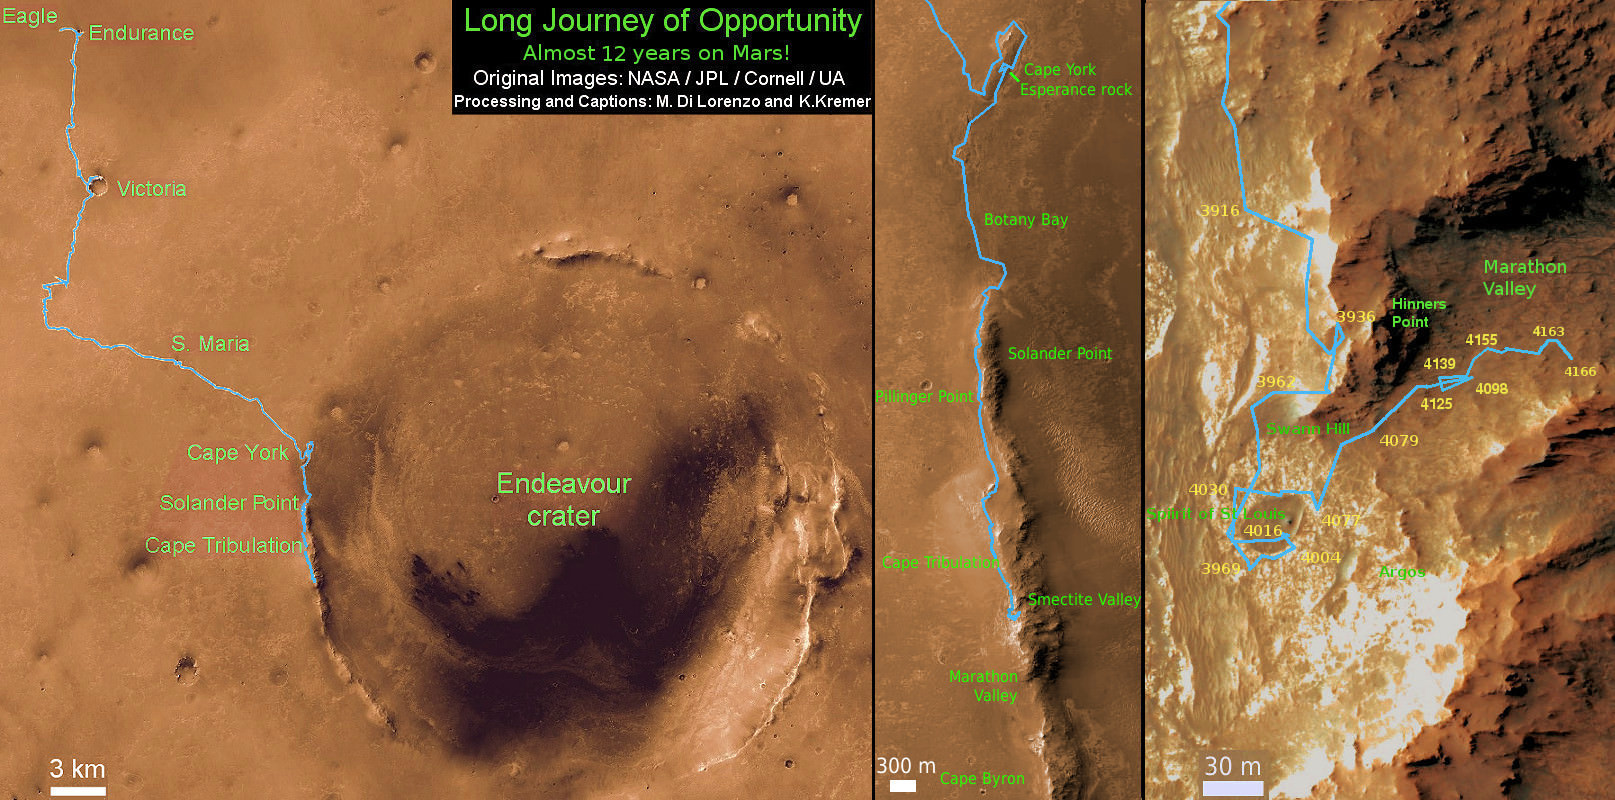 Nearly 12 Year Traverse Map for NASA’s Opportunity rover from 2004 to 2015.  This map shows the entire path the rover has driven during almost 12 years and more than a marathon runners distance on Mars for over 4191 Sols, or Martian days, since landing inside Eagle Crater on Jan 24, 2004 – to current location at the western rim of Endeavour Crater and descending into Marathon Valley. Rover surpassed Marathon distance on Sol 3968 and marked 11th Martian anniversary on Sol 3911. Opportunity discovered clay minerals at Esperance – indicative of a habitable zone – and is currently searching for more at Marathon Valley. Credit: NASA/JPL/Cornell/ASU/Marco Di Lorenzo/Ken Kremer/kenkremer.com